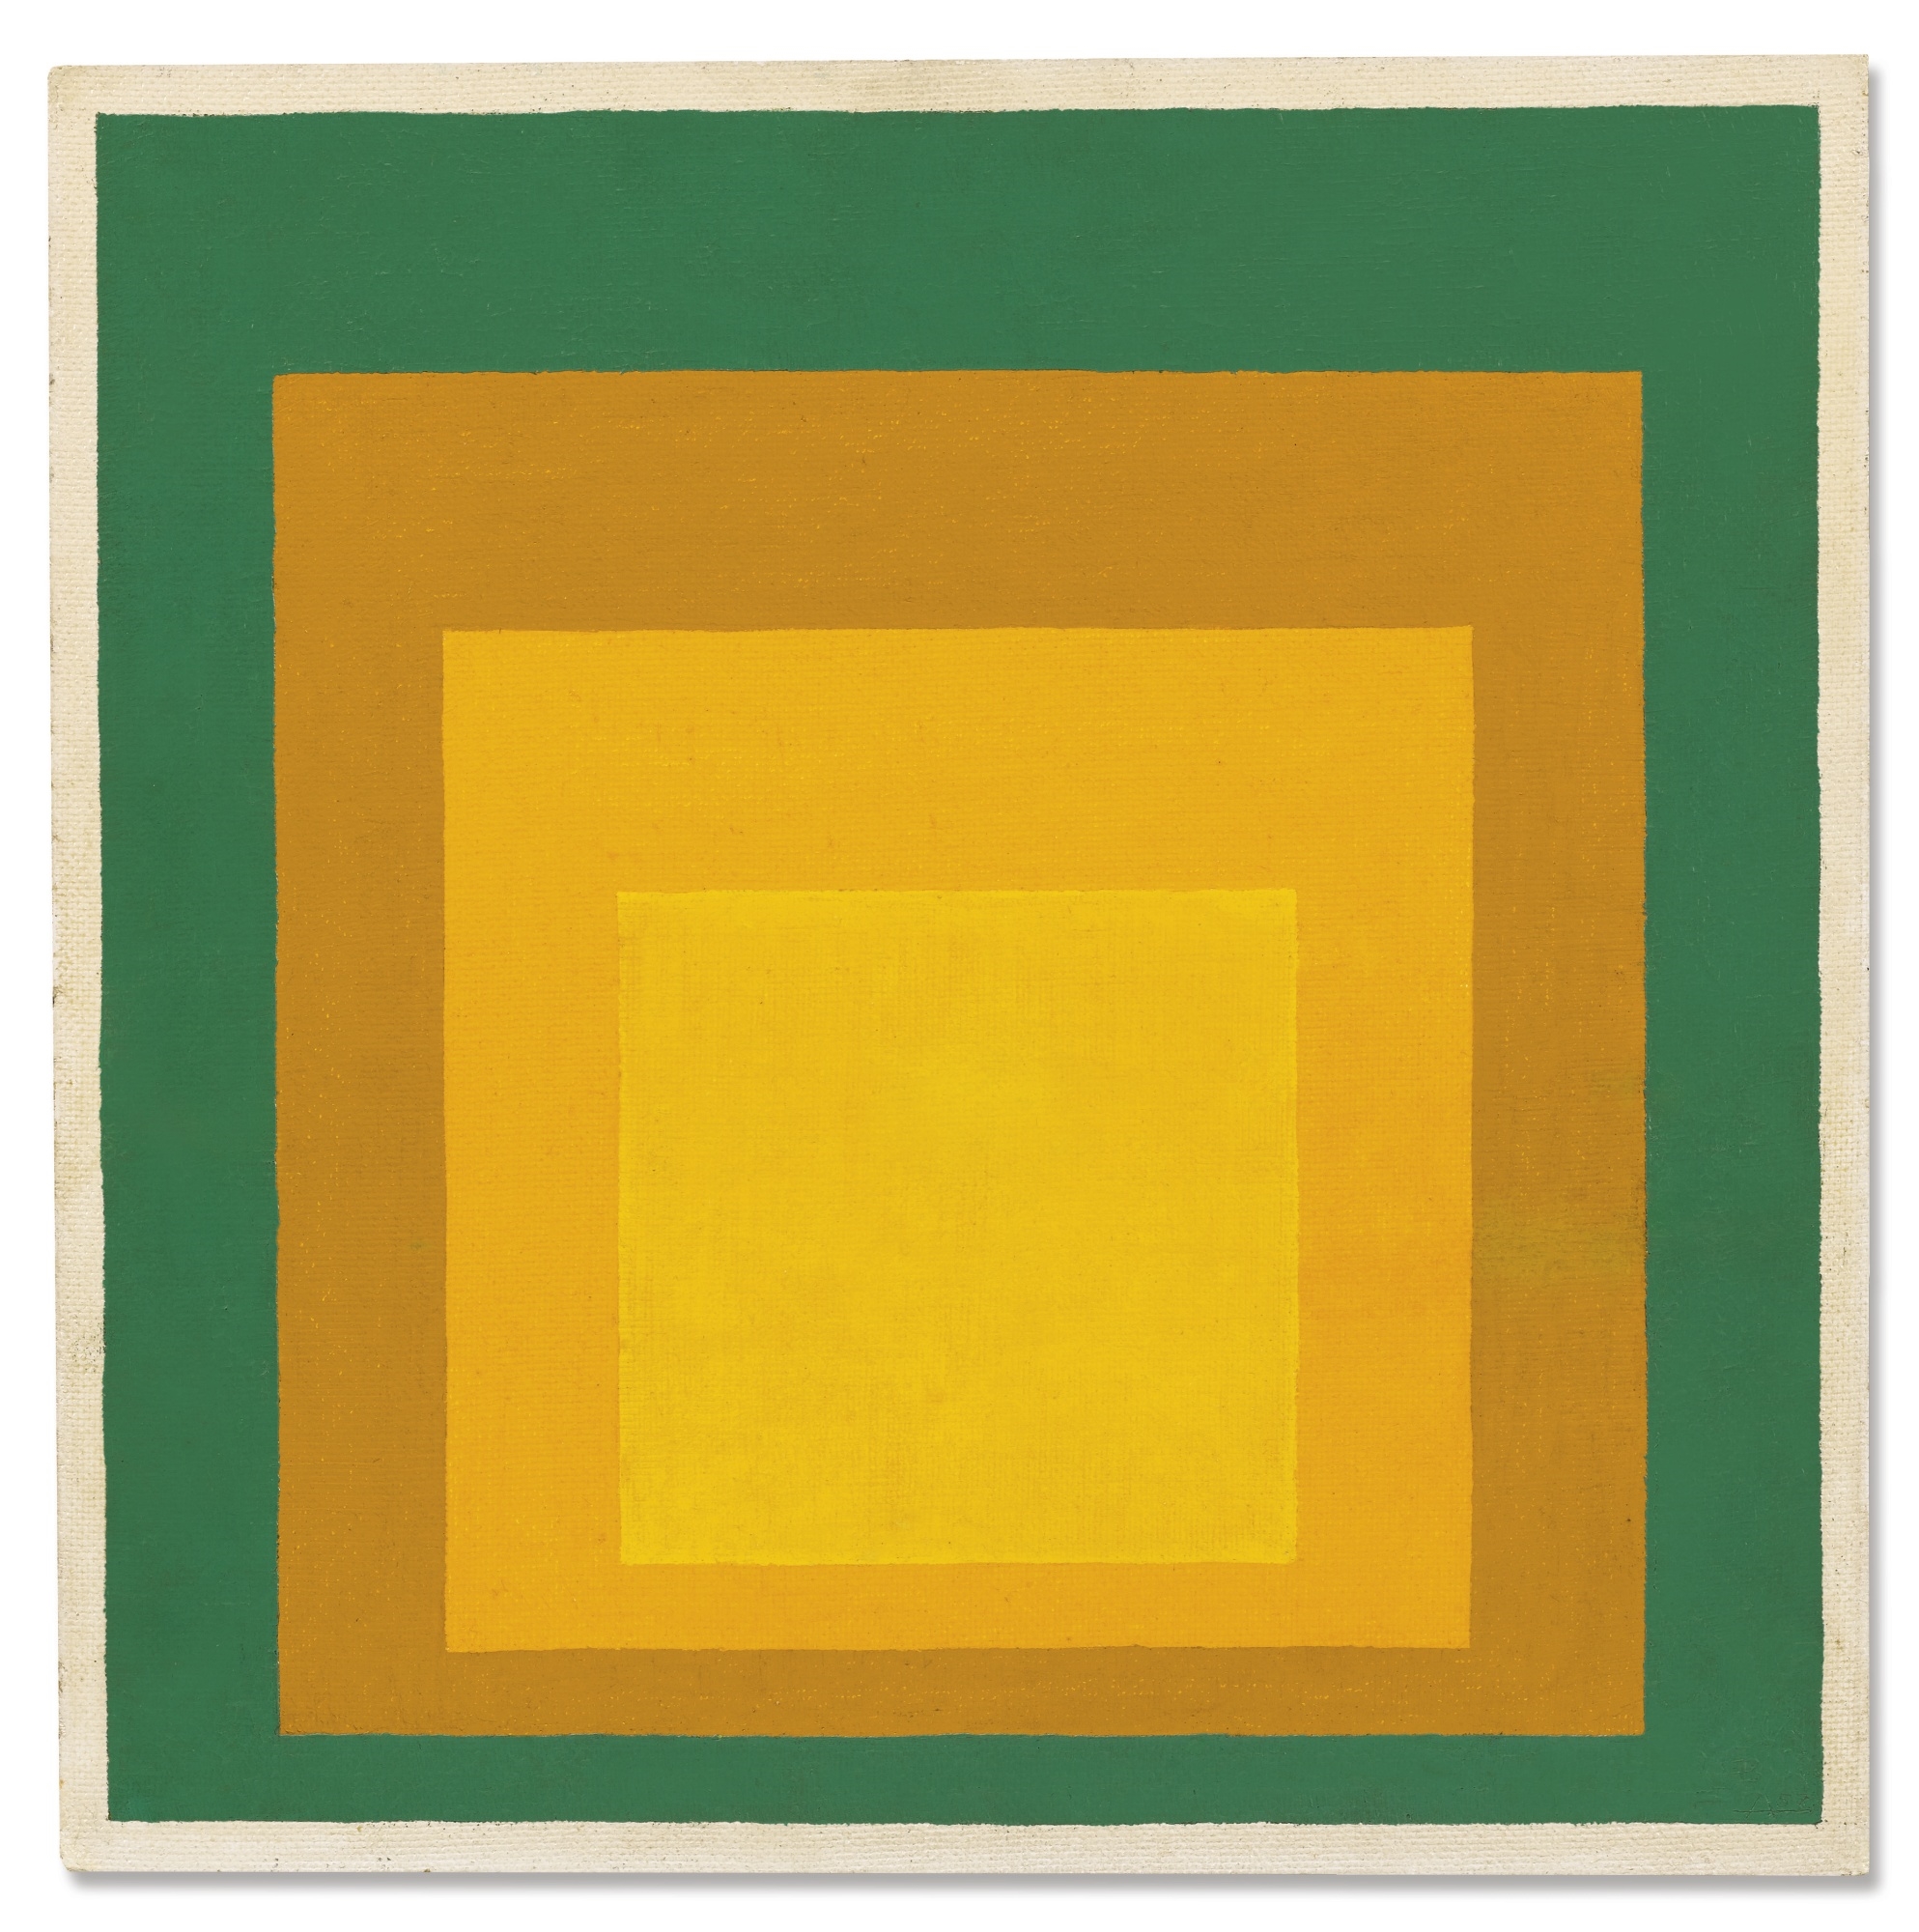 Homage to the square by Josef Albers, 1957